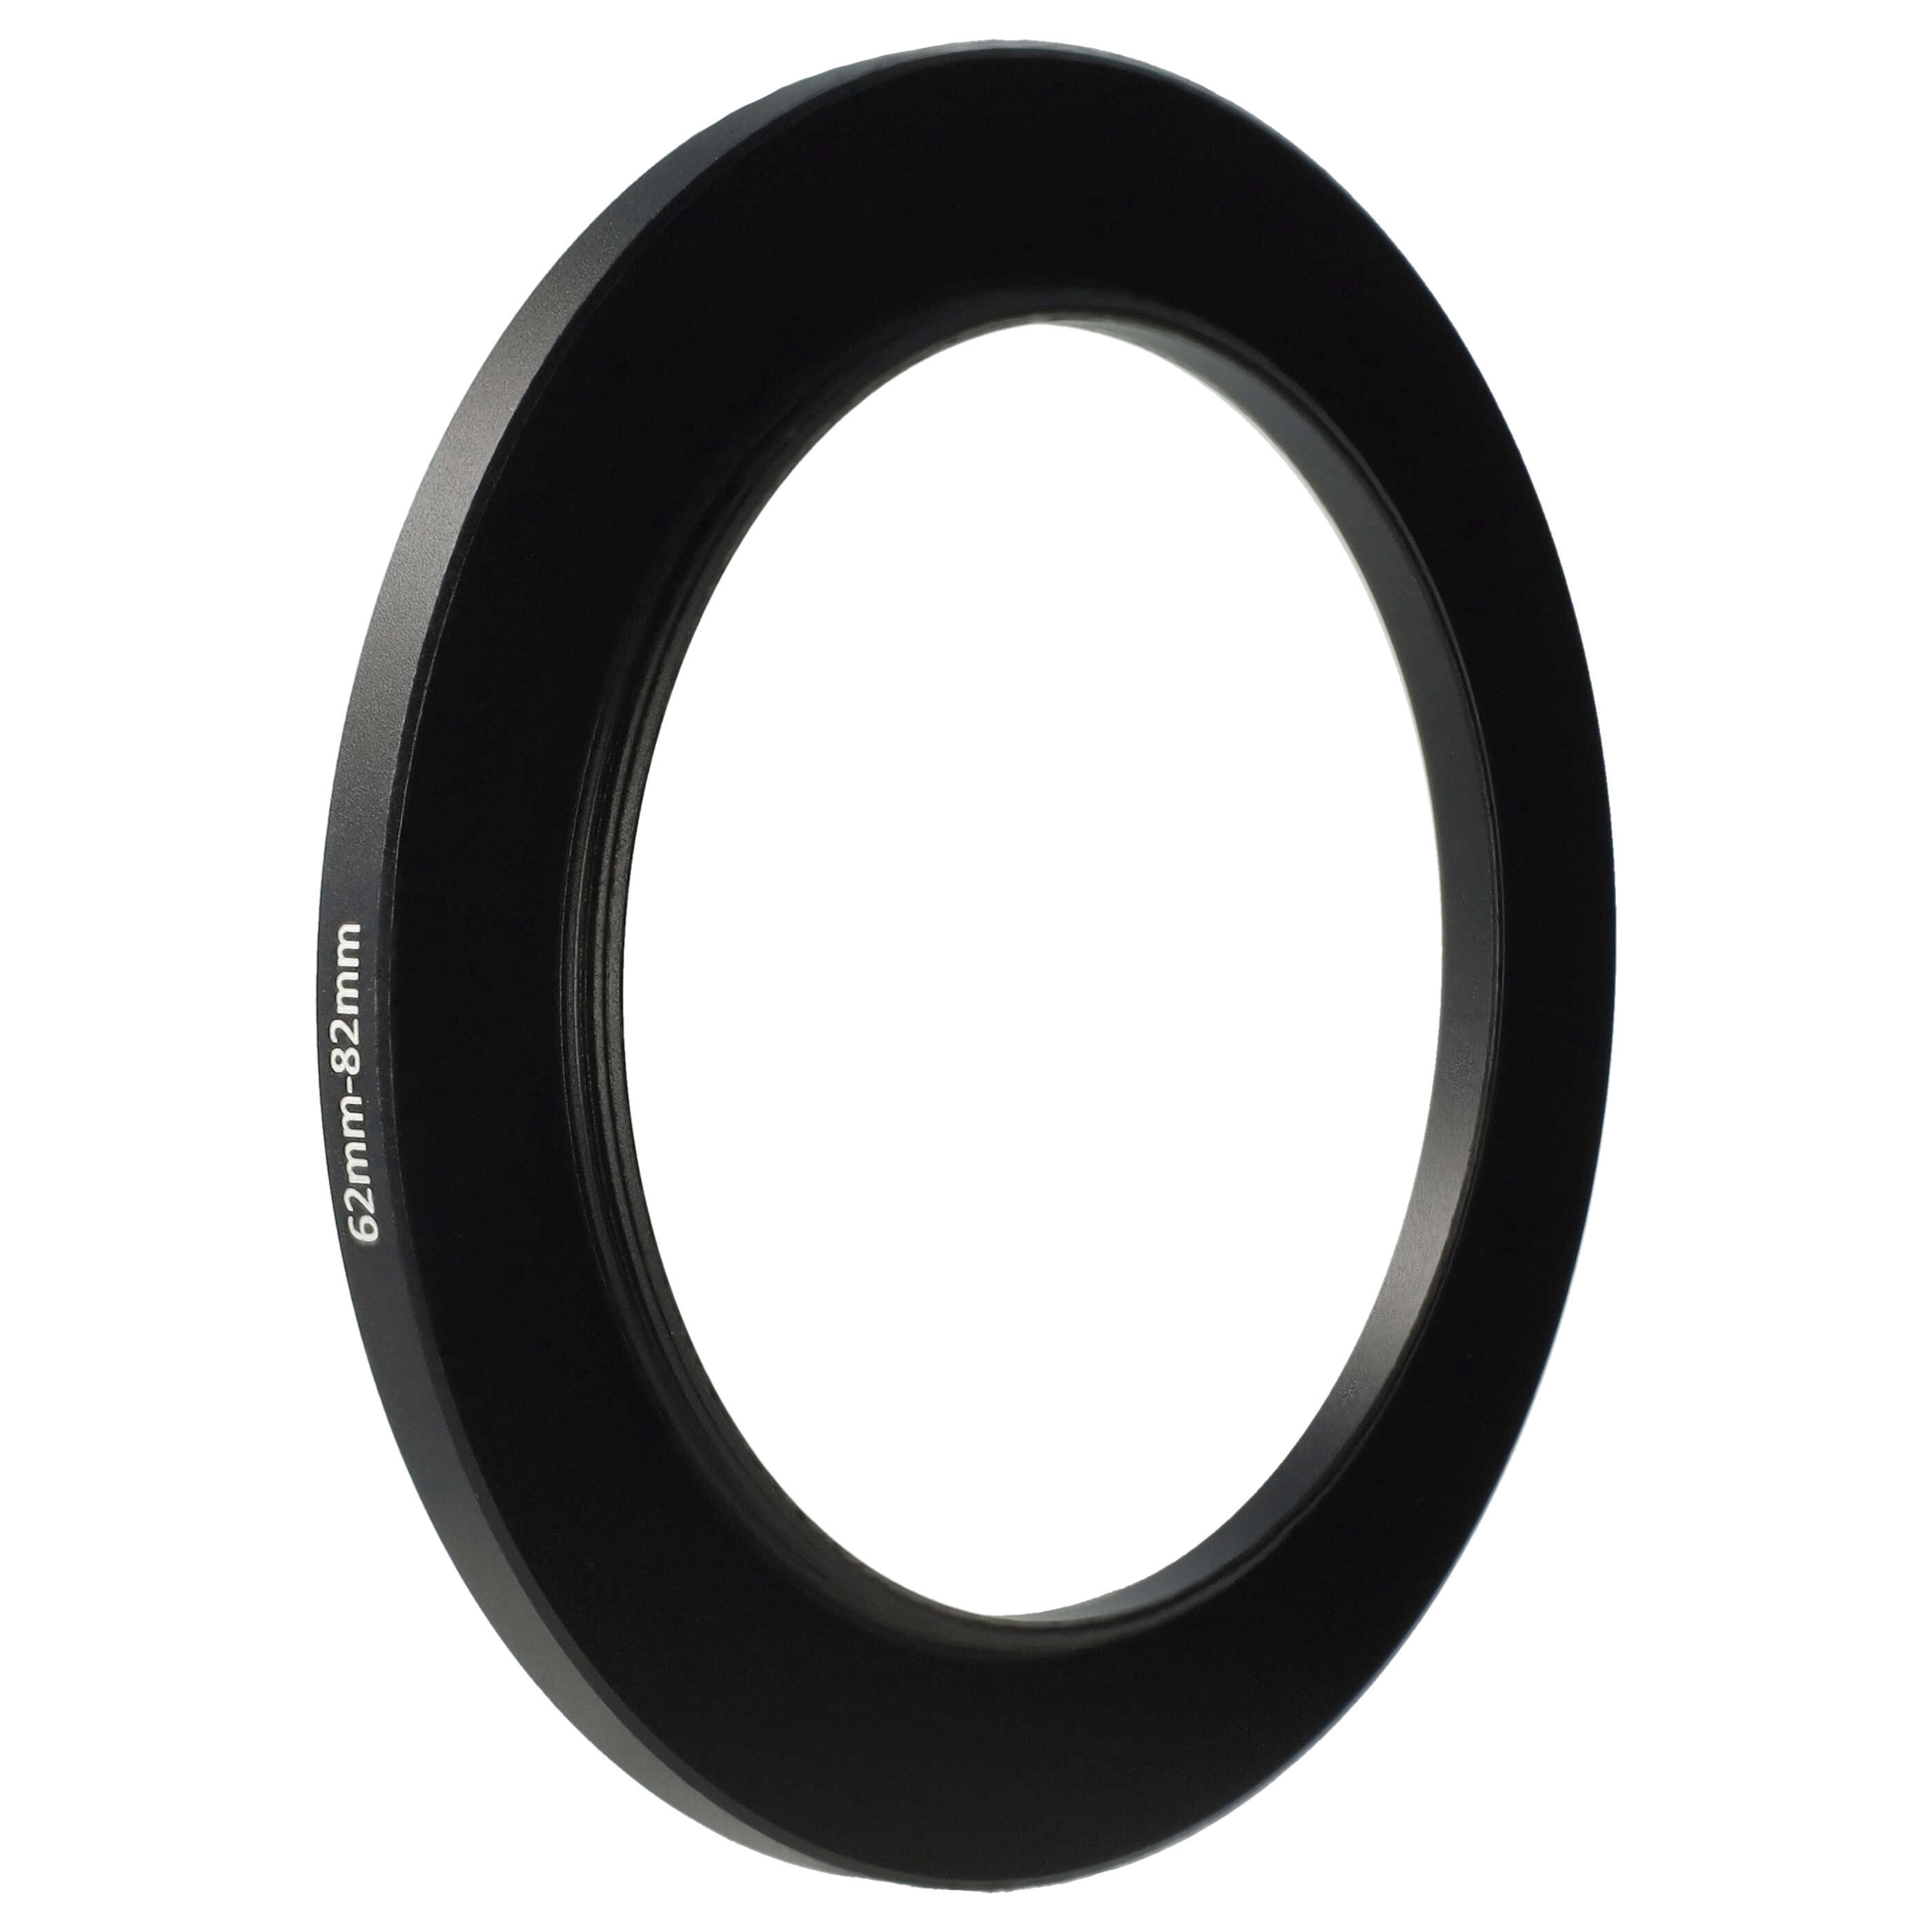 Step-Up Ring Adapter of 62 mm to 82 mmfor various Camera Lens - Filter Adapter